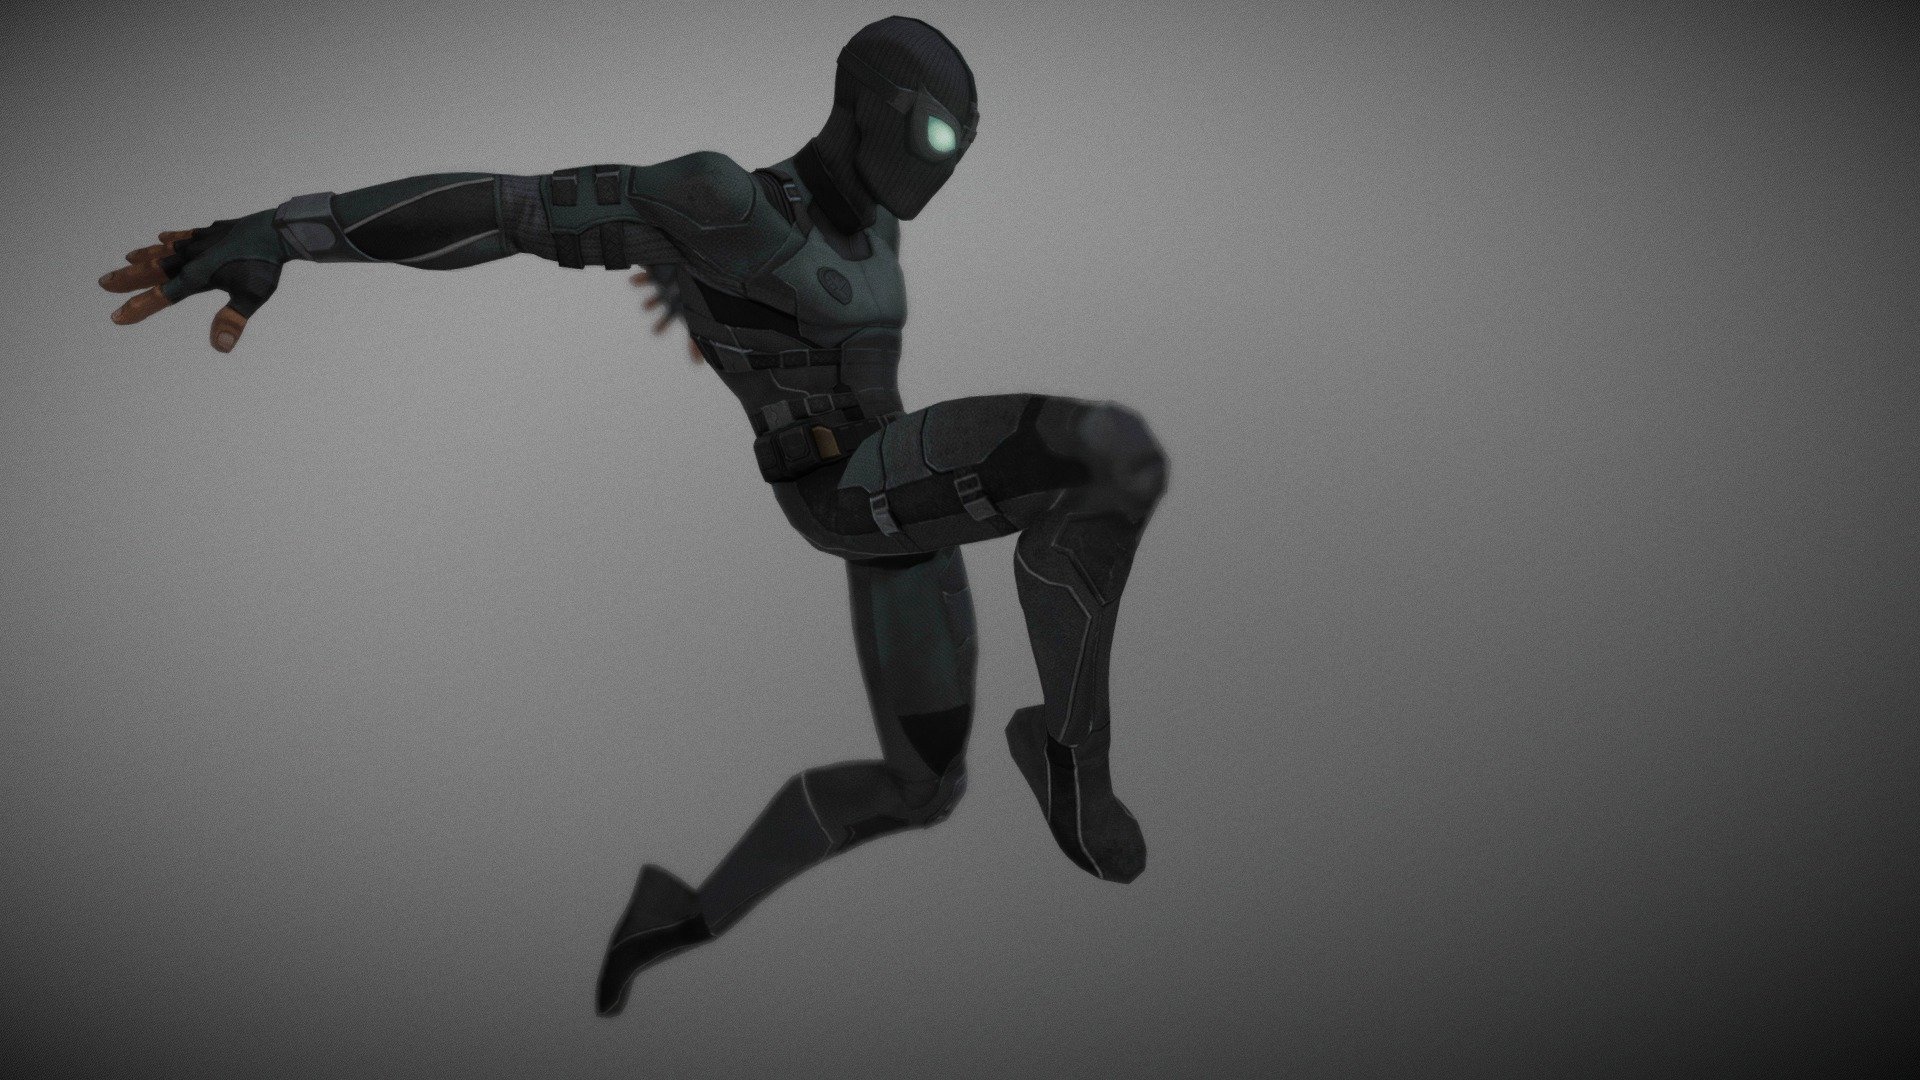 Flying Through The Air Super Hero Pose Refernce by AdorkaStock on DeviantArt